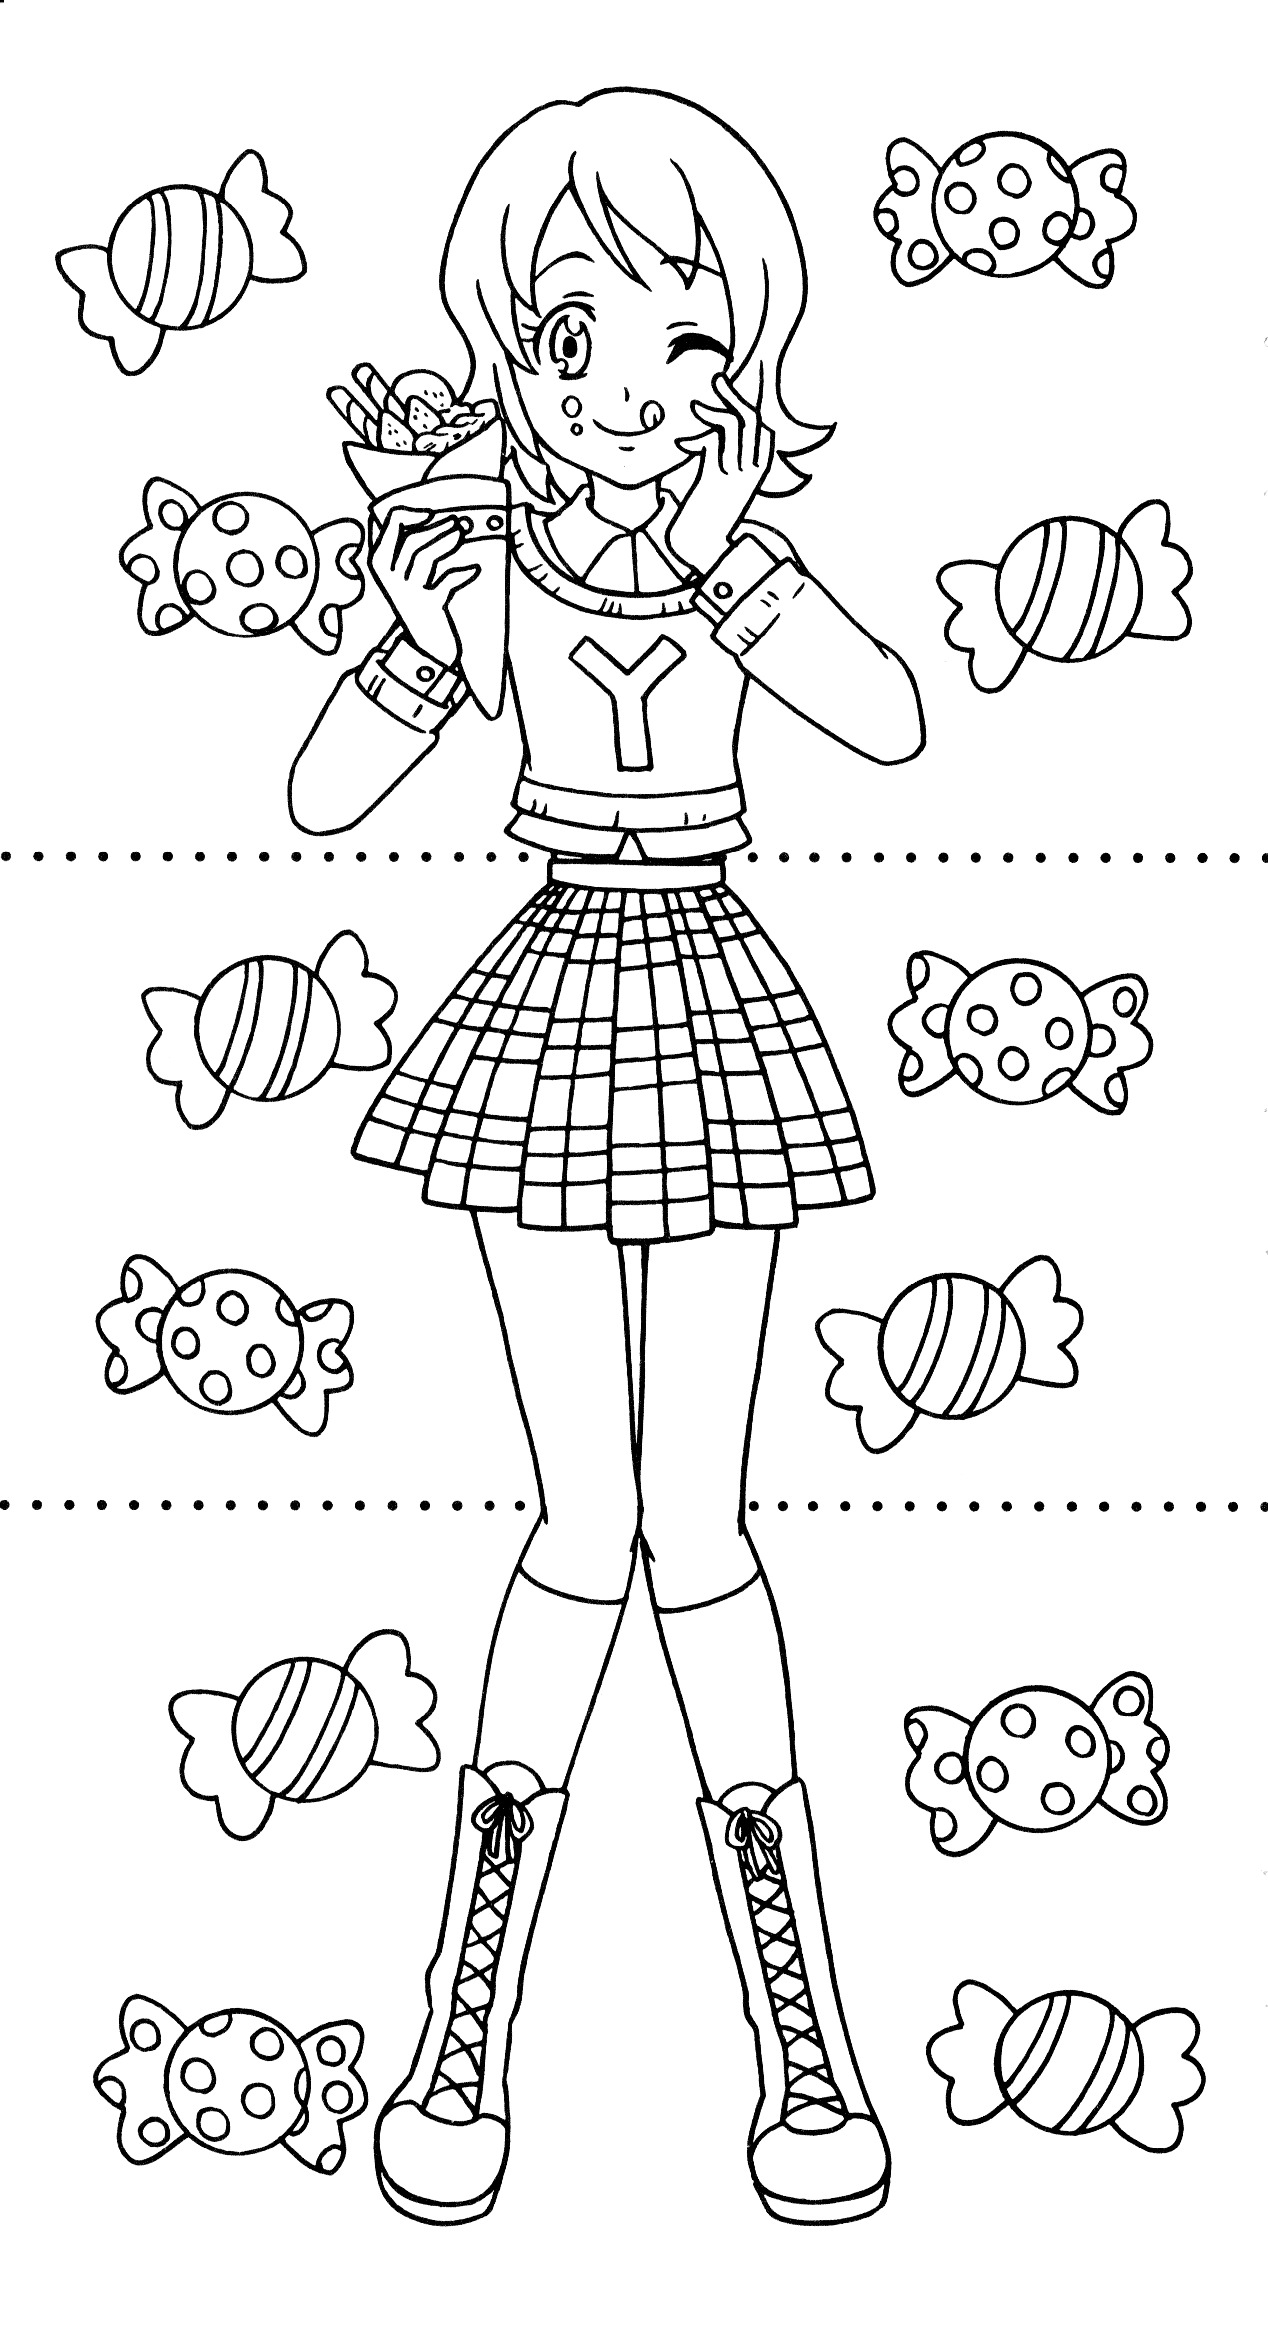 Happiness Charge Precure Dressup Coloring Book 12